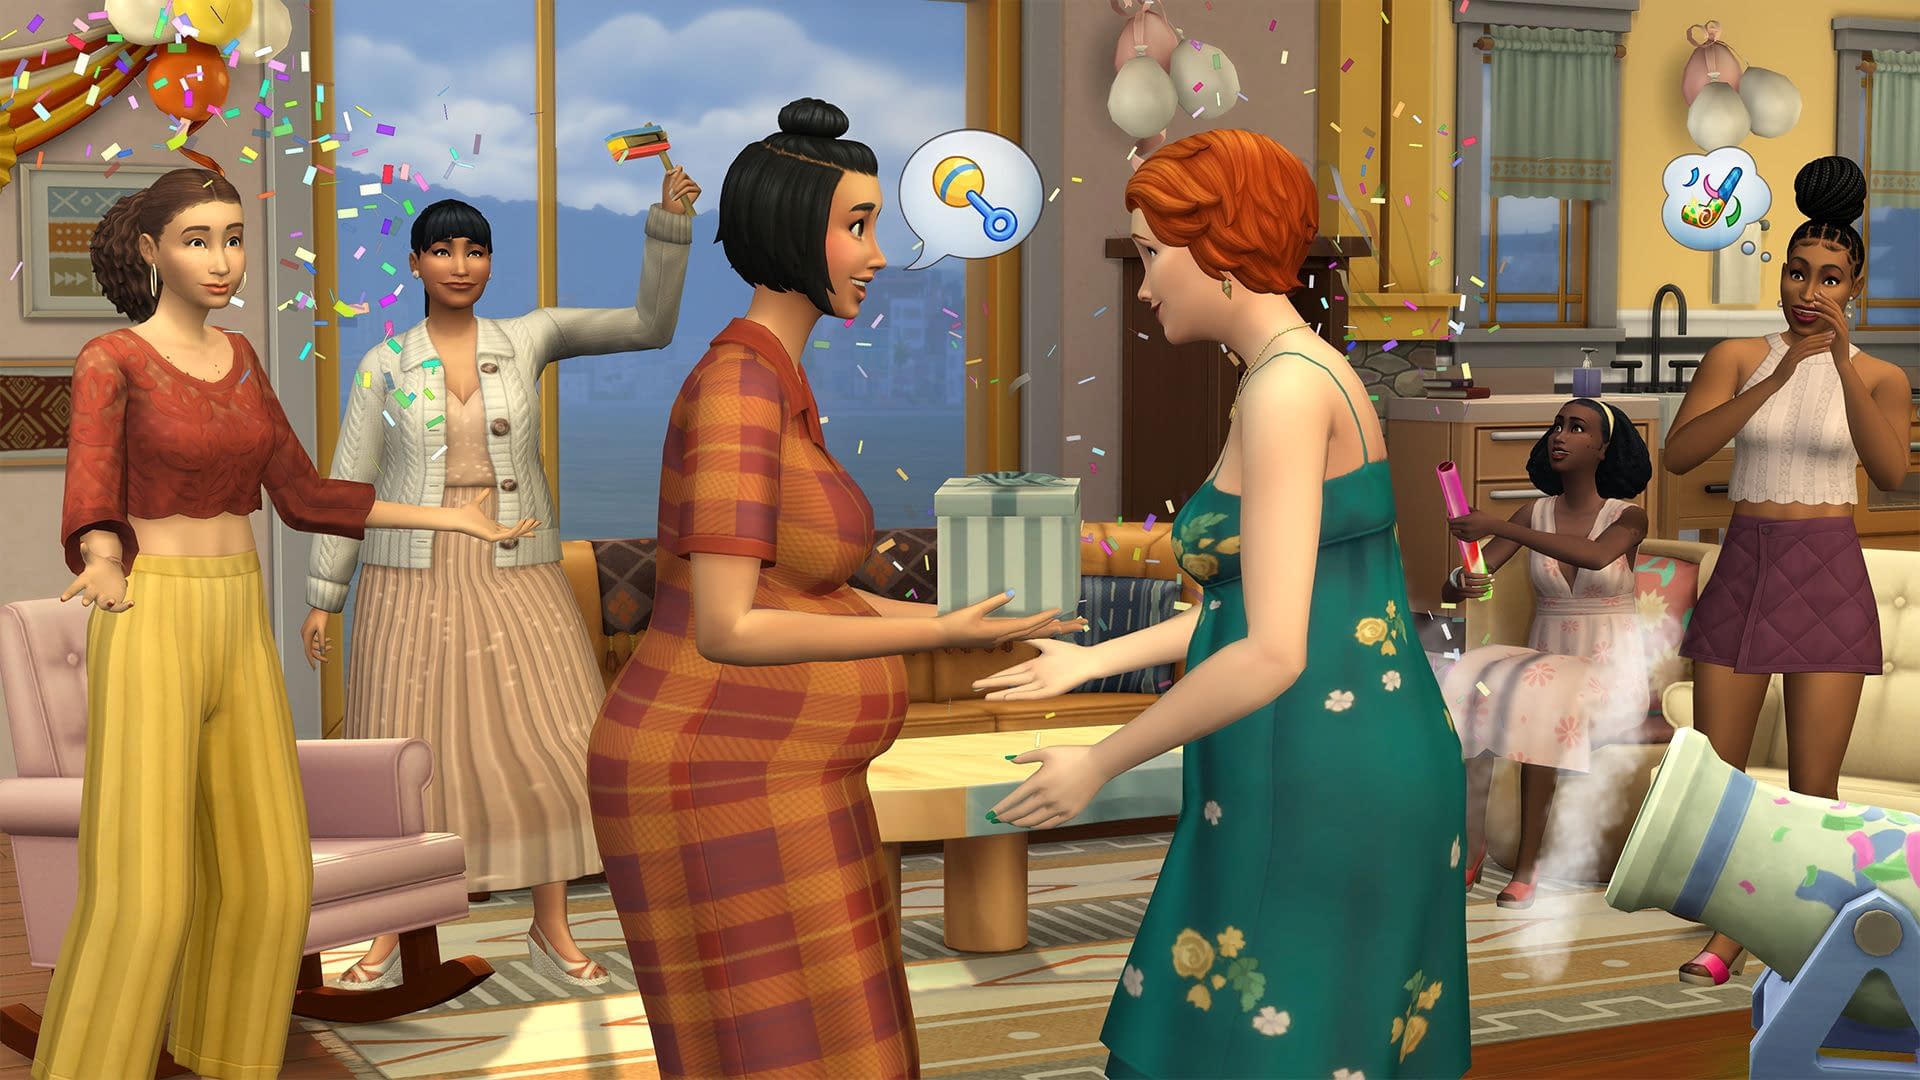 Growing Together Announced as the Next Expansion Pack for The Sims 4 -  KeenGamer